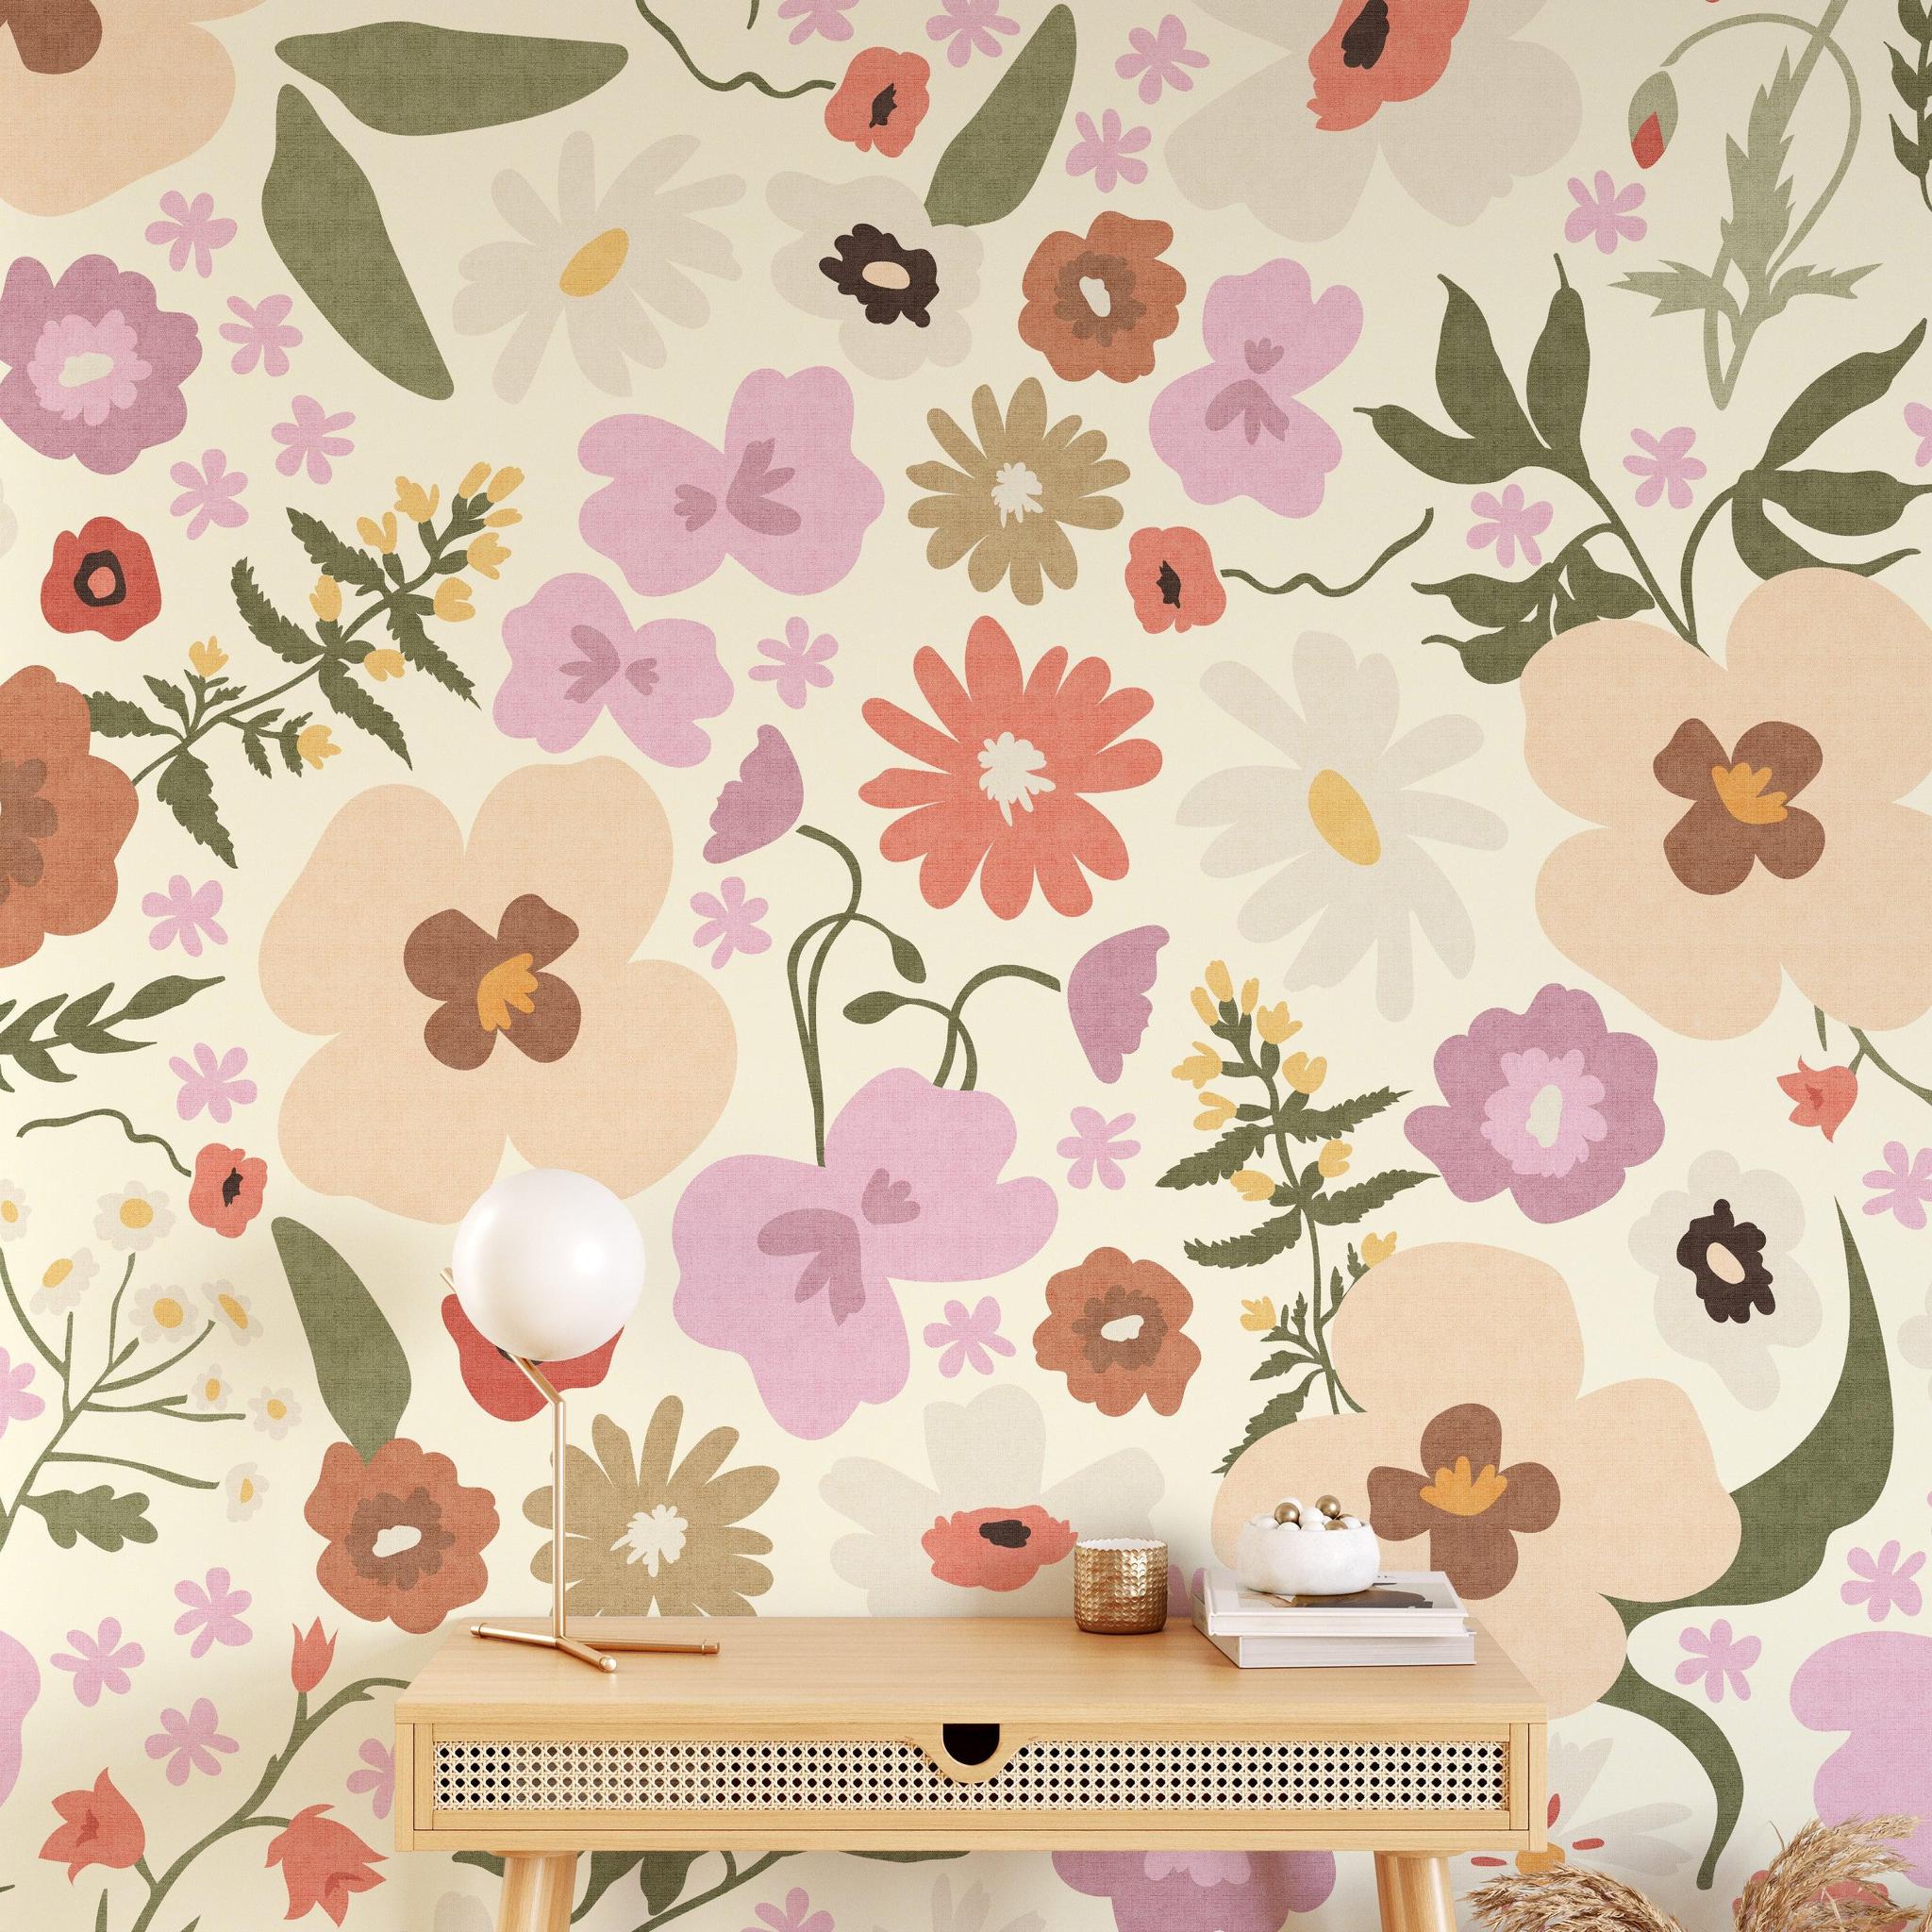 Hadley Wallpaper from Wall Blush SG02 decorating a cozy home office with a floral design.
